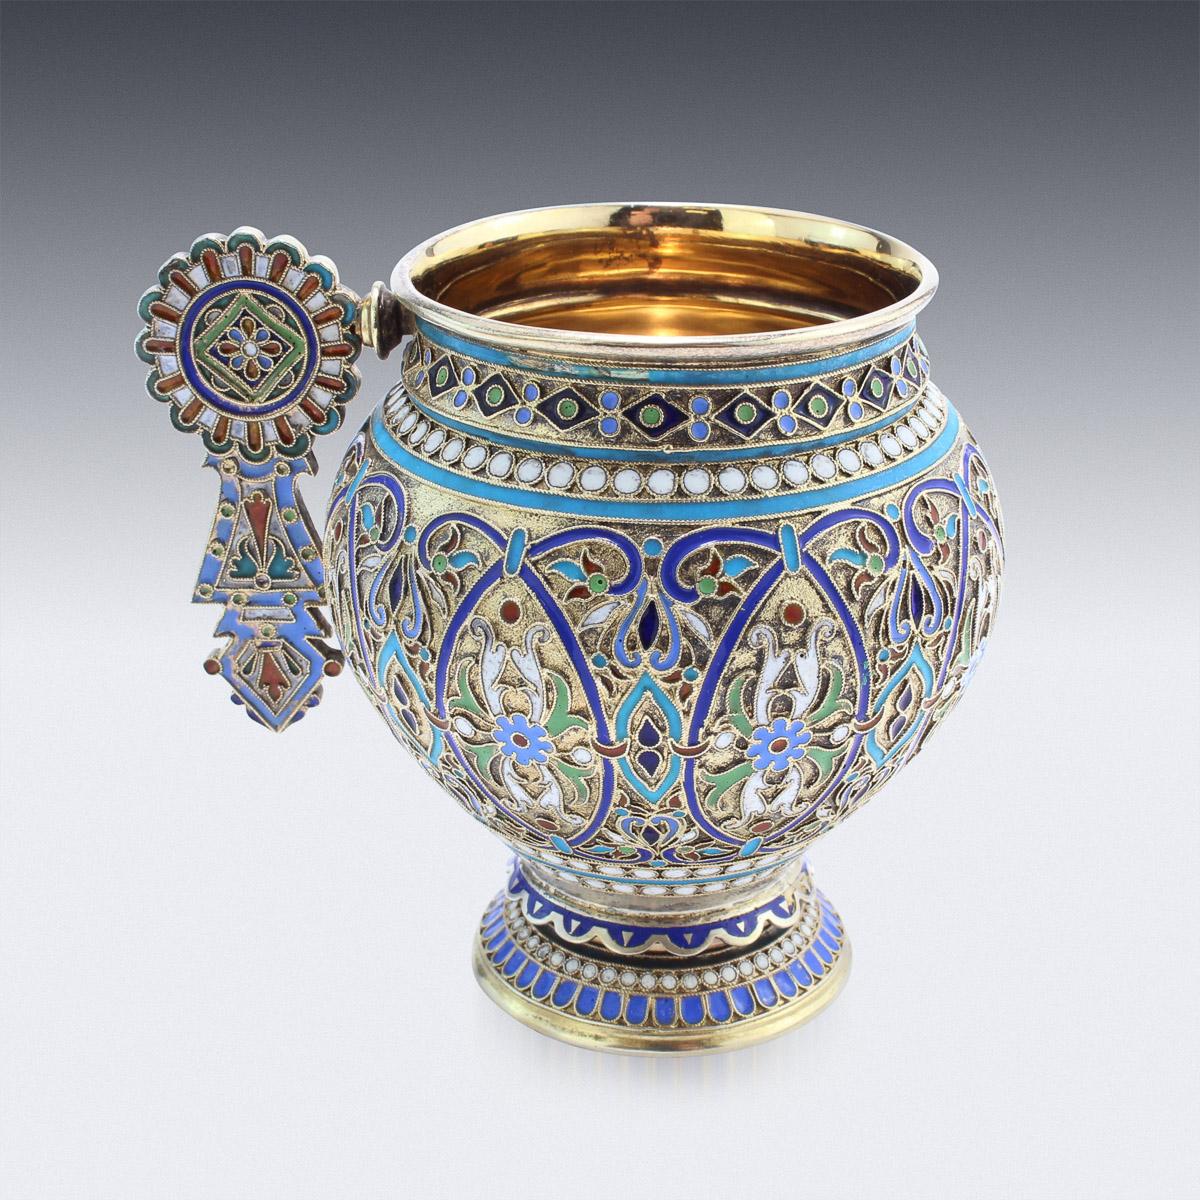 Antique late-19th century Imperial Russian solid silver-gilt and cloisonne enamel cup and saucer, each part richly gilt and beautifully enamelled with varicolor flowers, scrolling foliage, stylized pan-slavic handle and beaded white boarders along